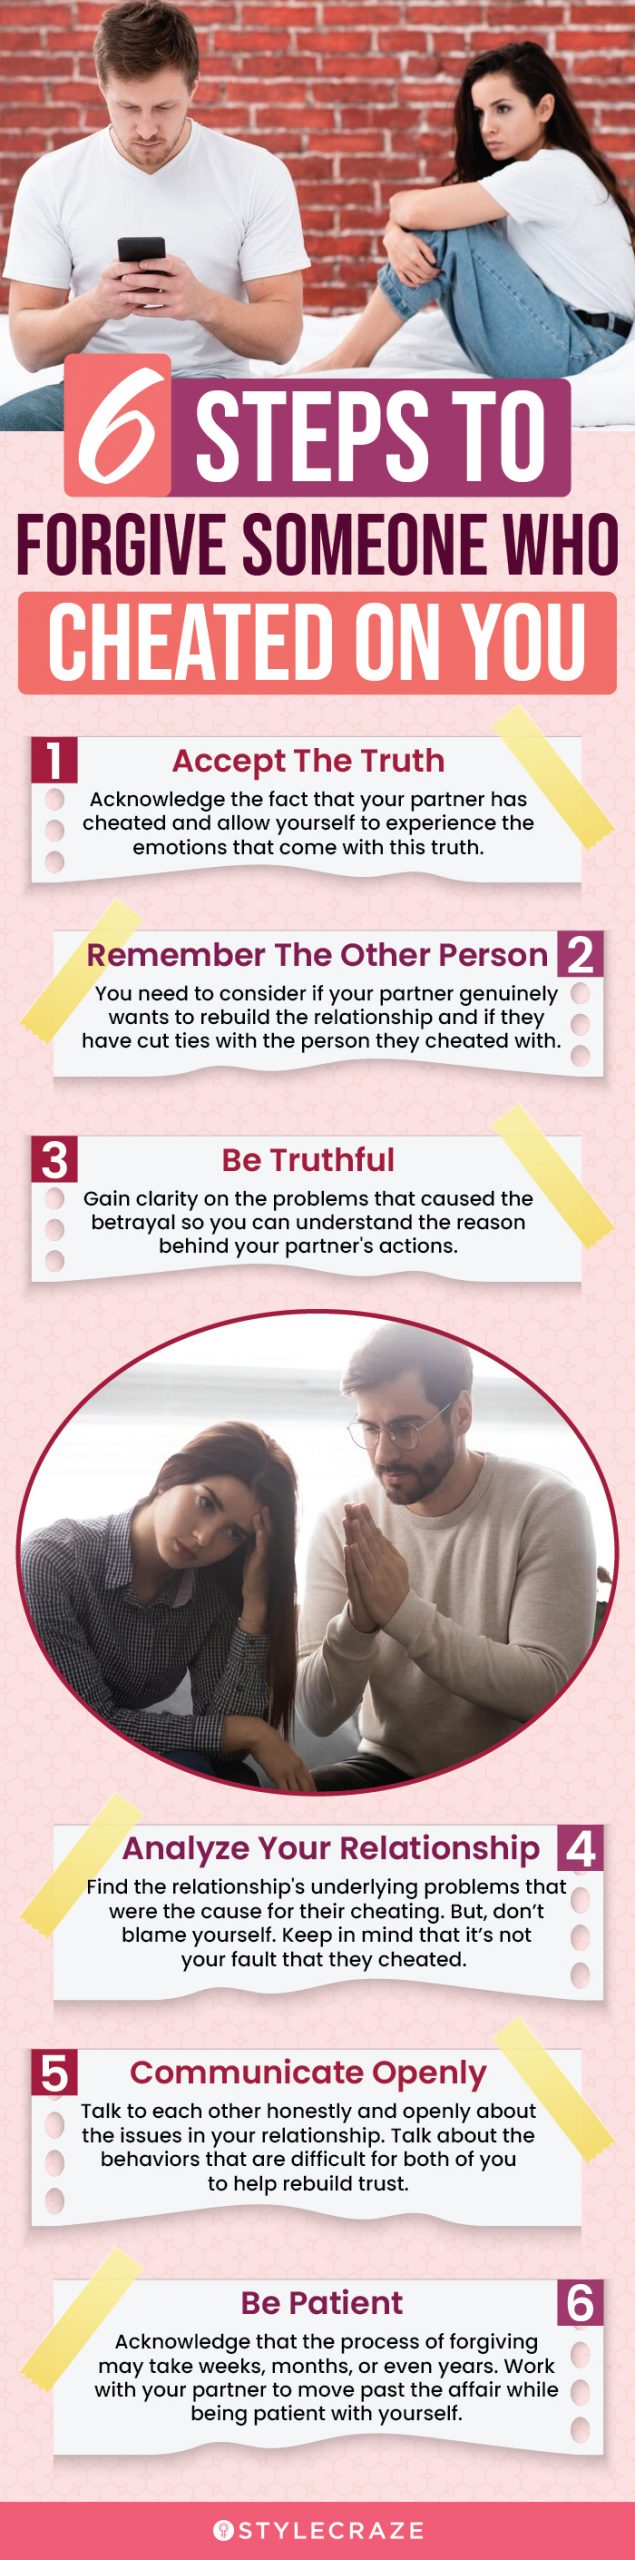 6 steps to forgive someone who cheated on you (infographic)